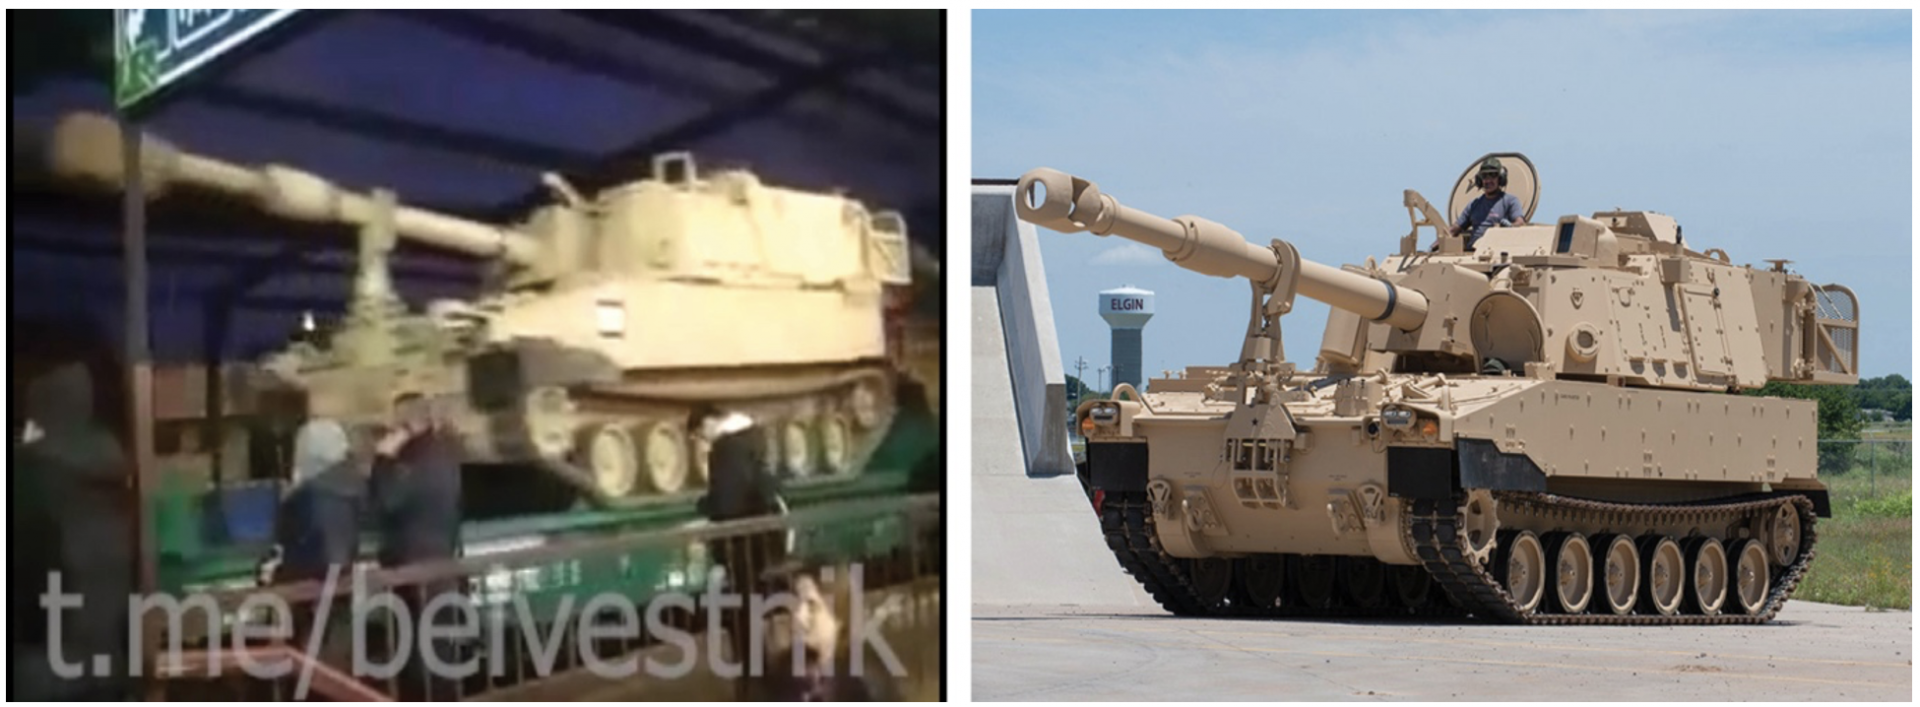 Military vehicles visible in Belvestnik’s video match M109 A7 self-propelled howitzers. 